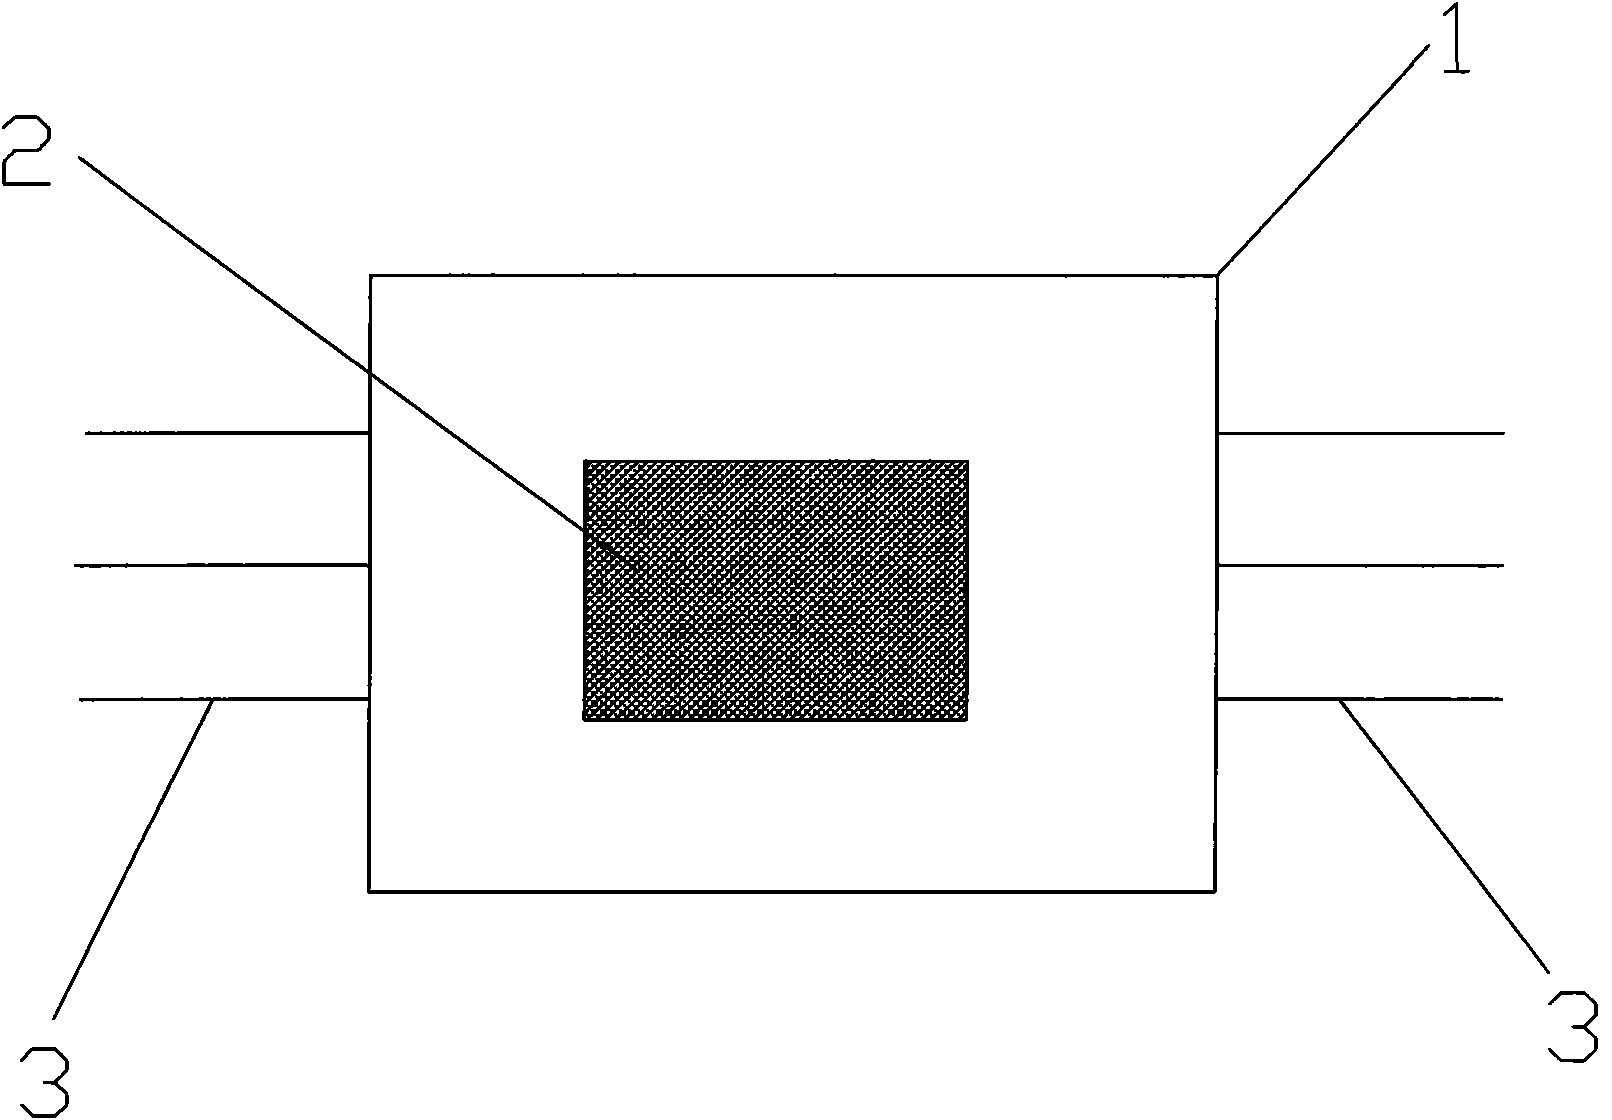 Packaging structure of surface-mount device infrared receiver